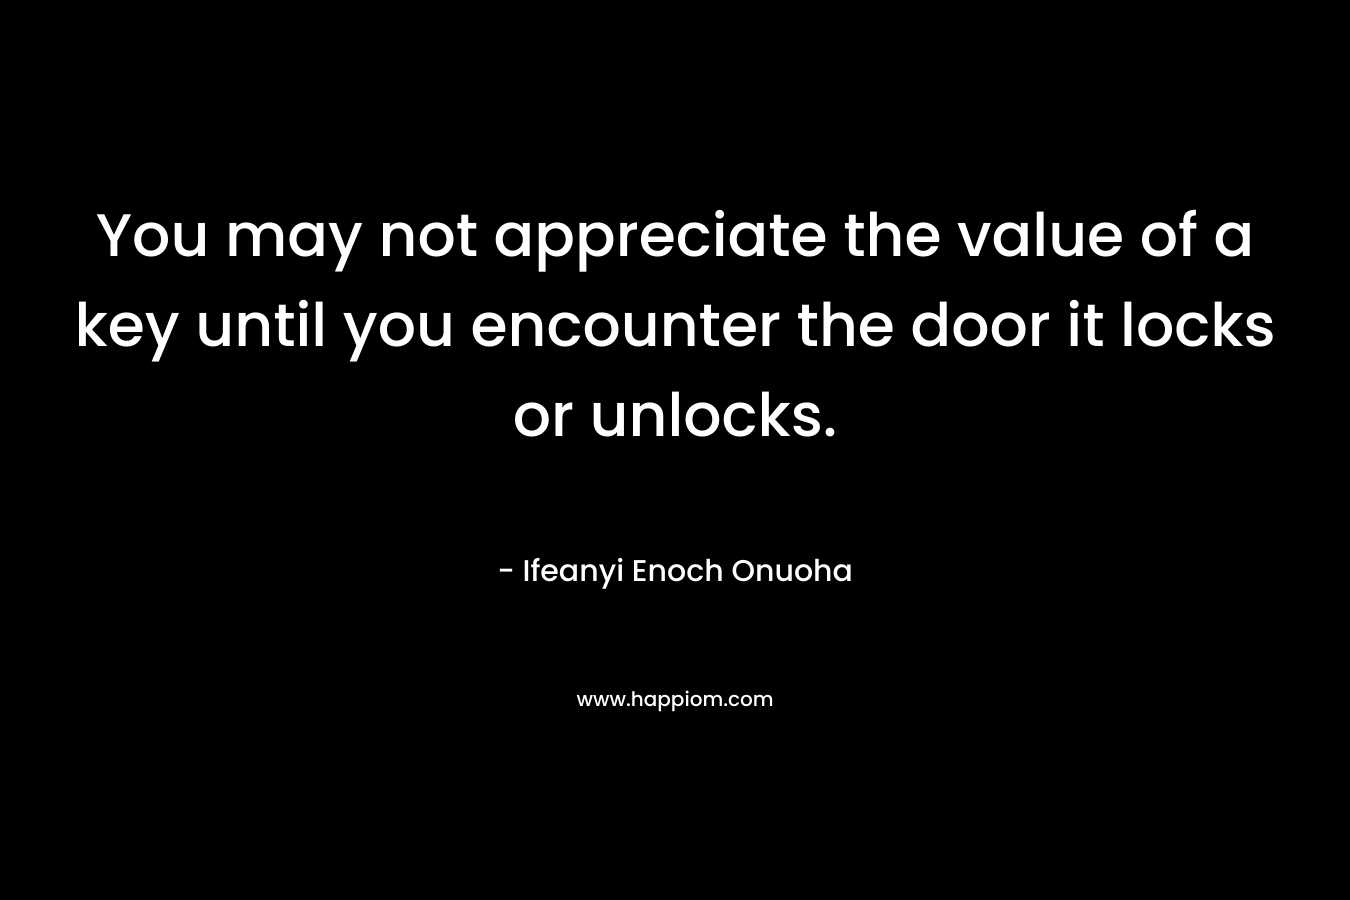 You may not appreciate the value of a key until you encounter the door it locks or unlocks. – Ifeanyi Enoch Onuoha